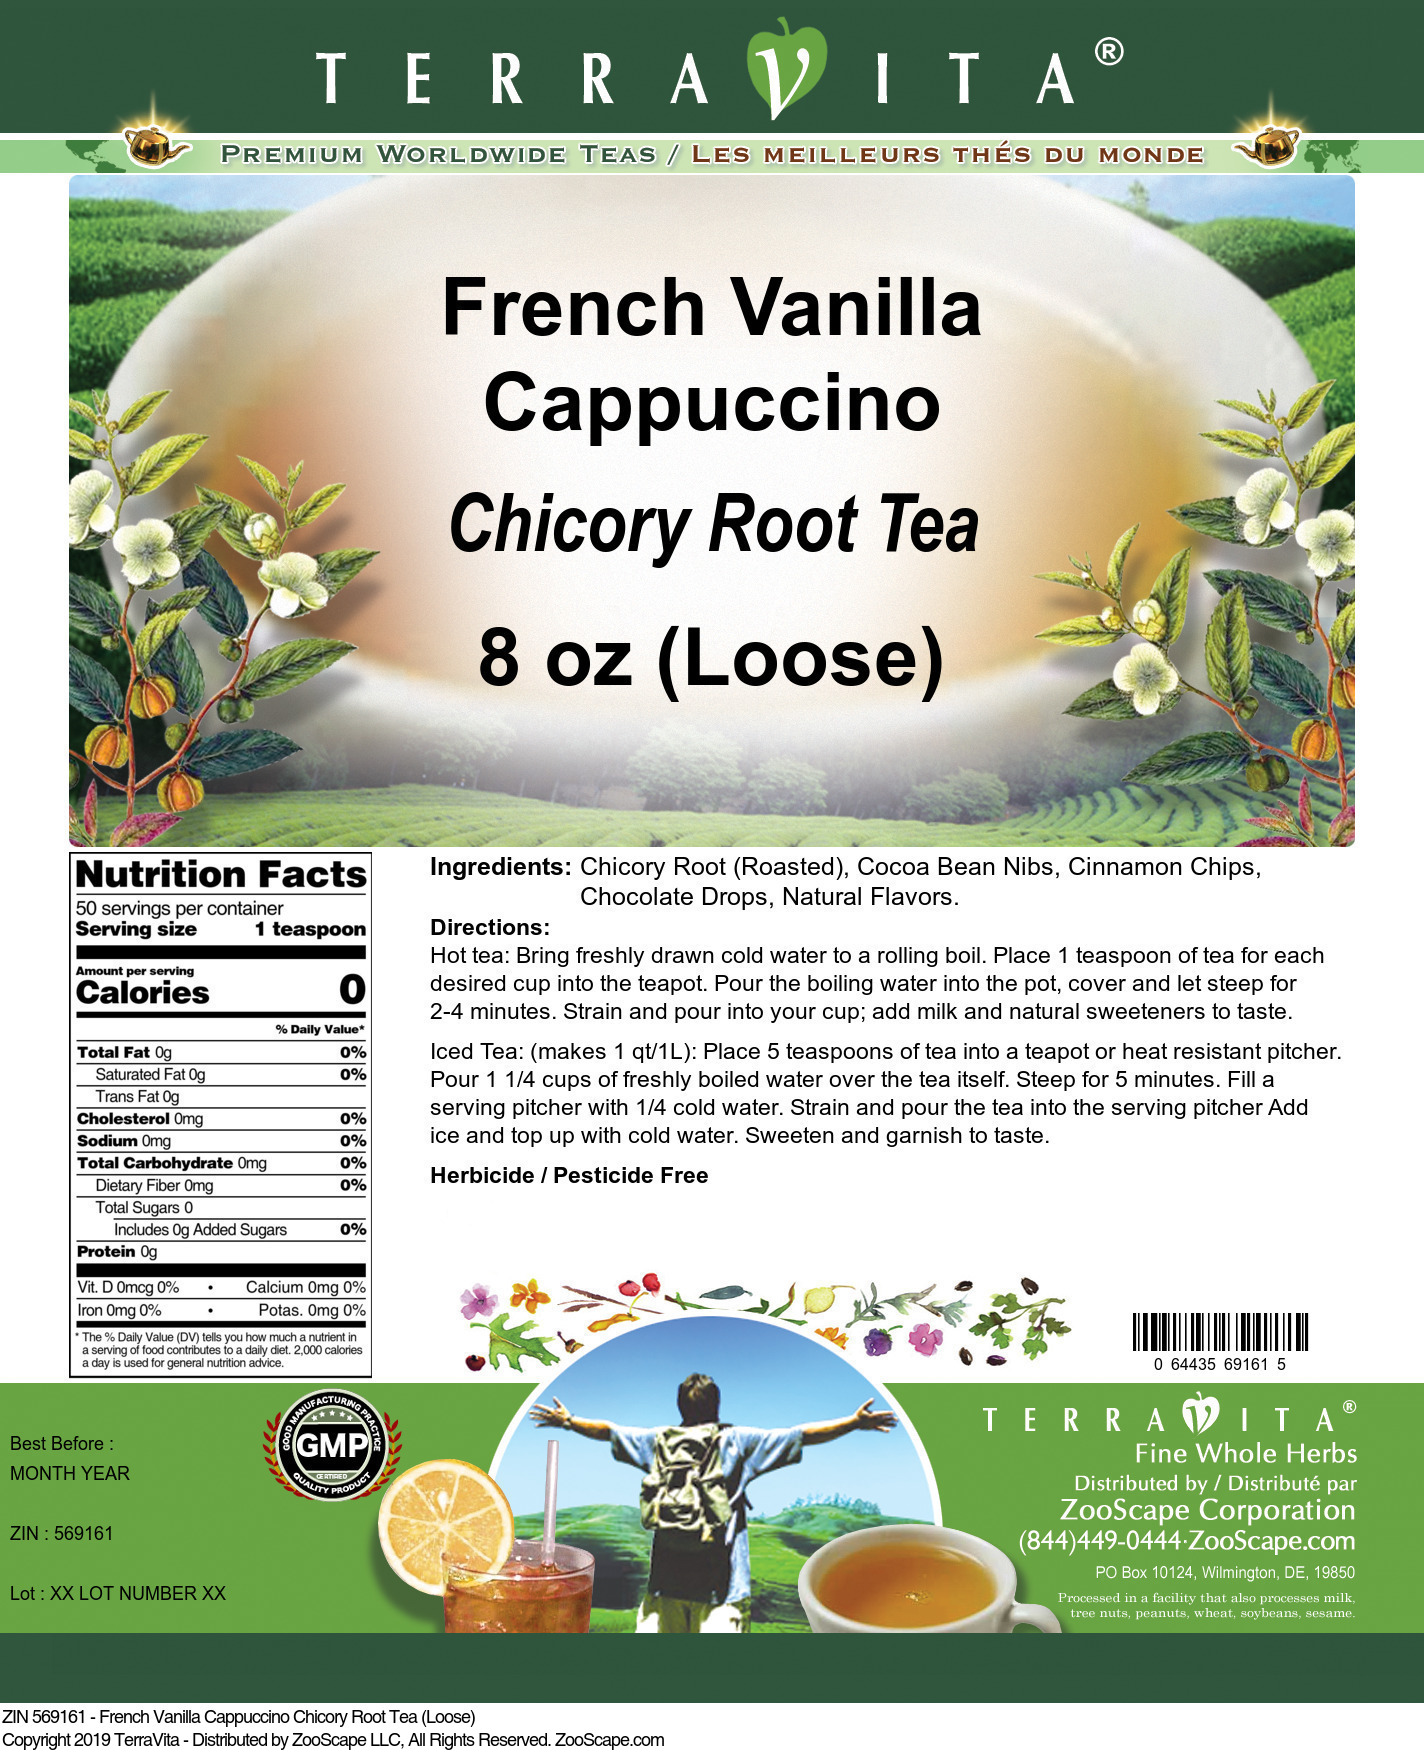 French Vanilla Cappuccino Chicory Root Tea (Loose) - Label